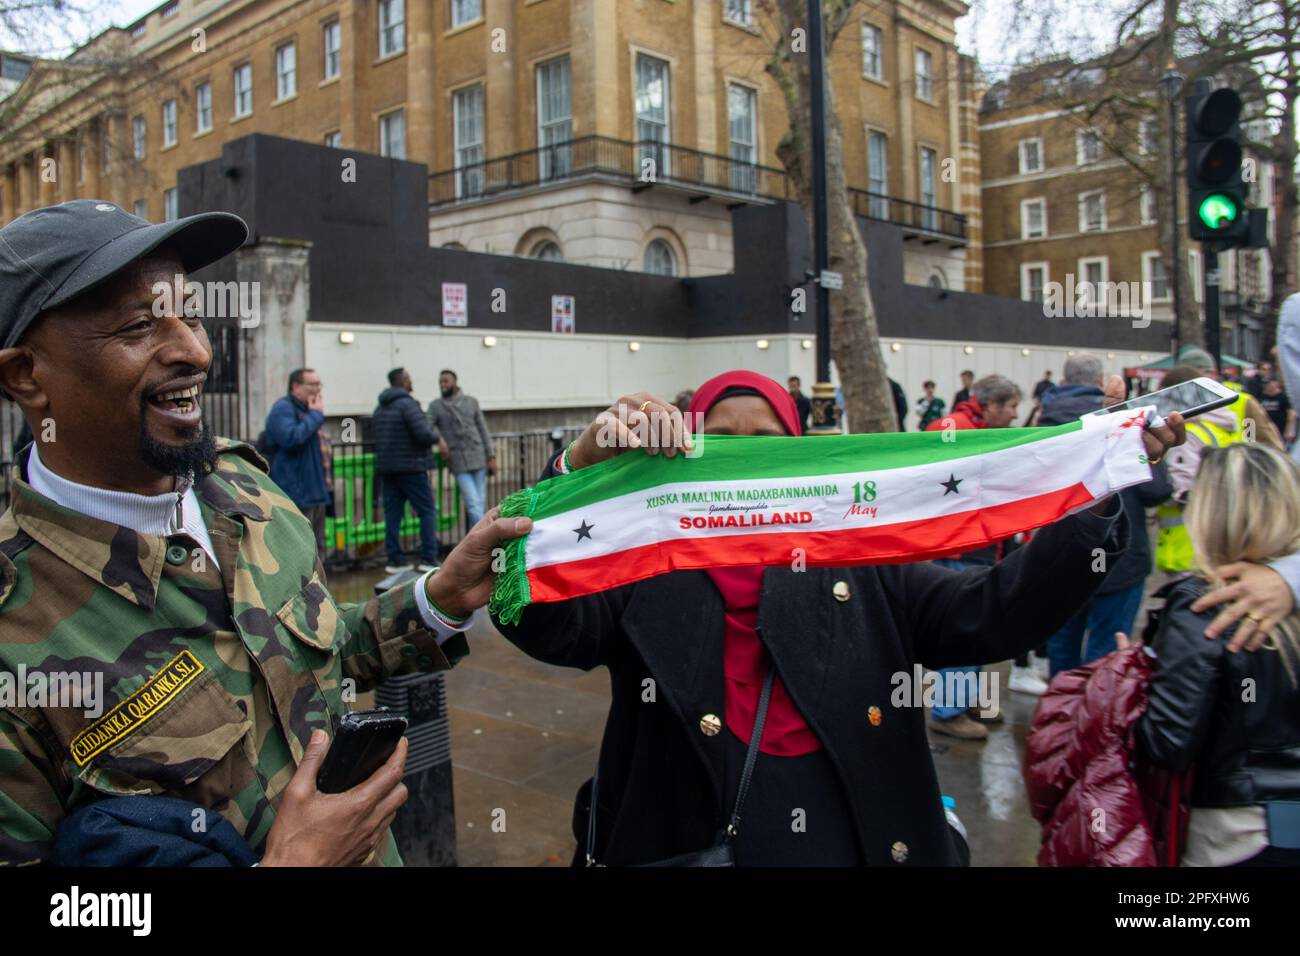 Pro-Somaliland independence demonstrators convened outside Downing Street. Stock Photo